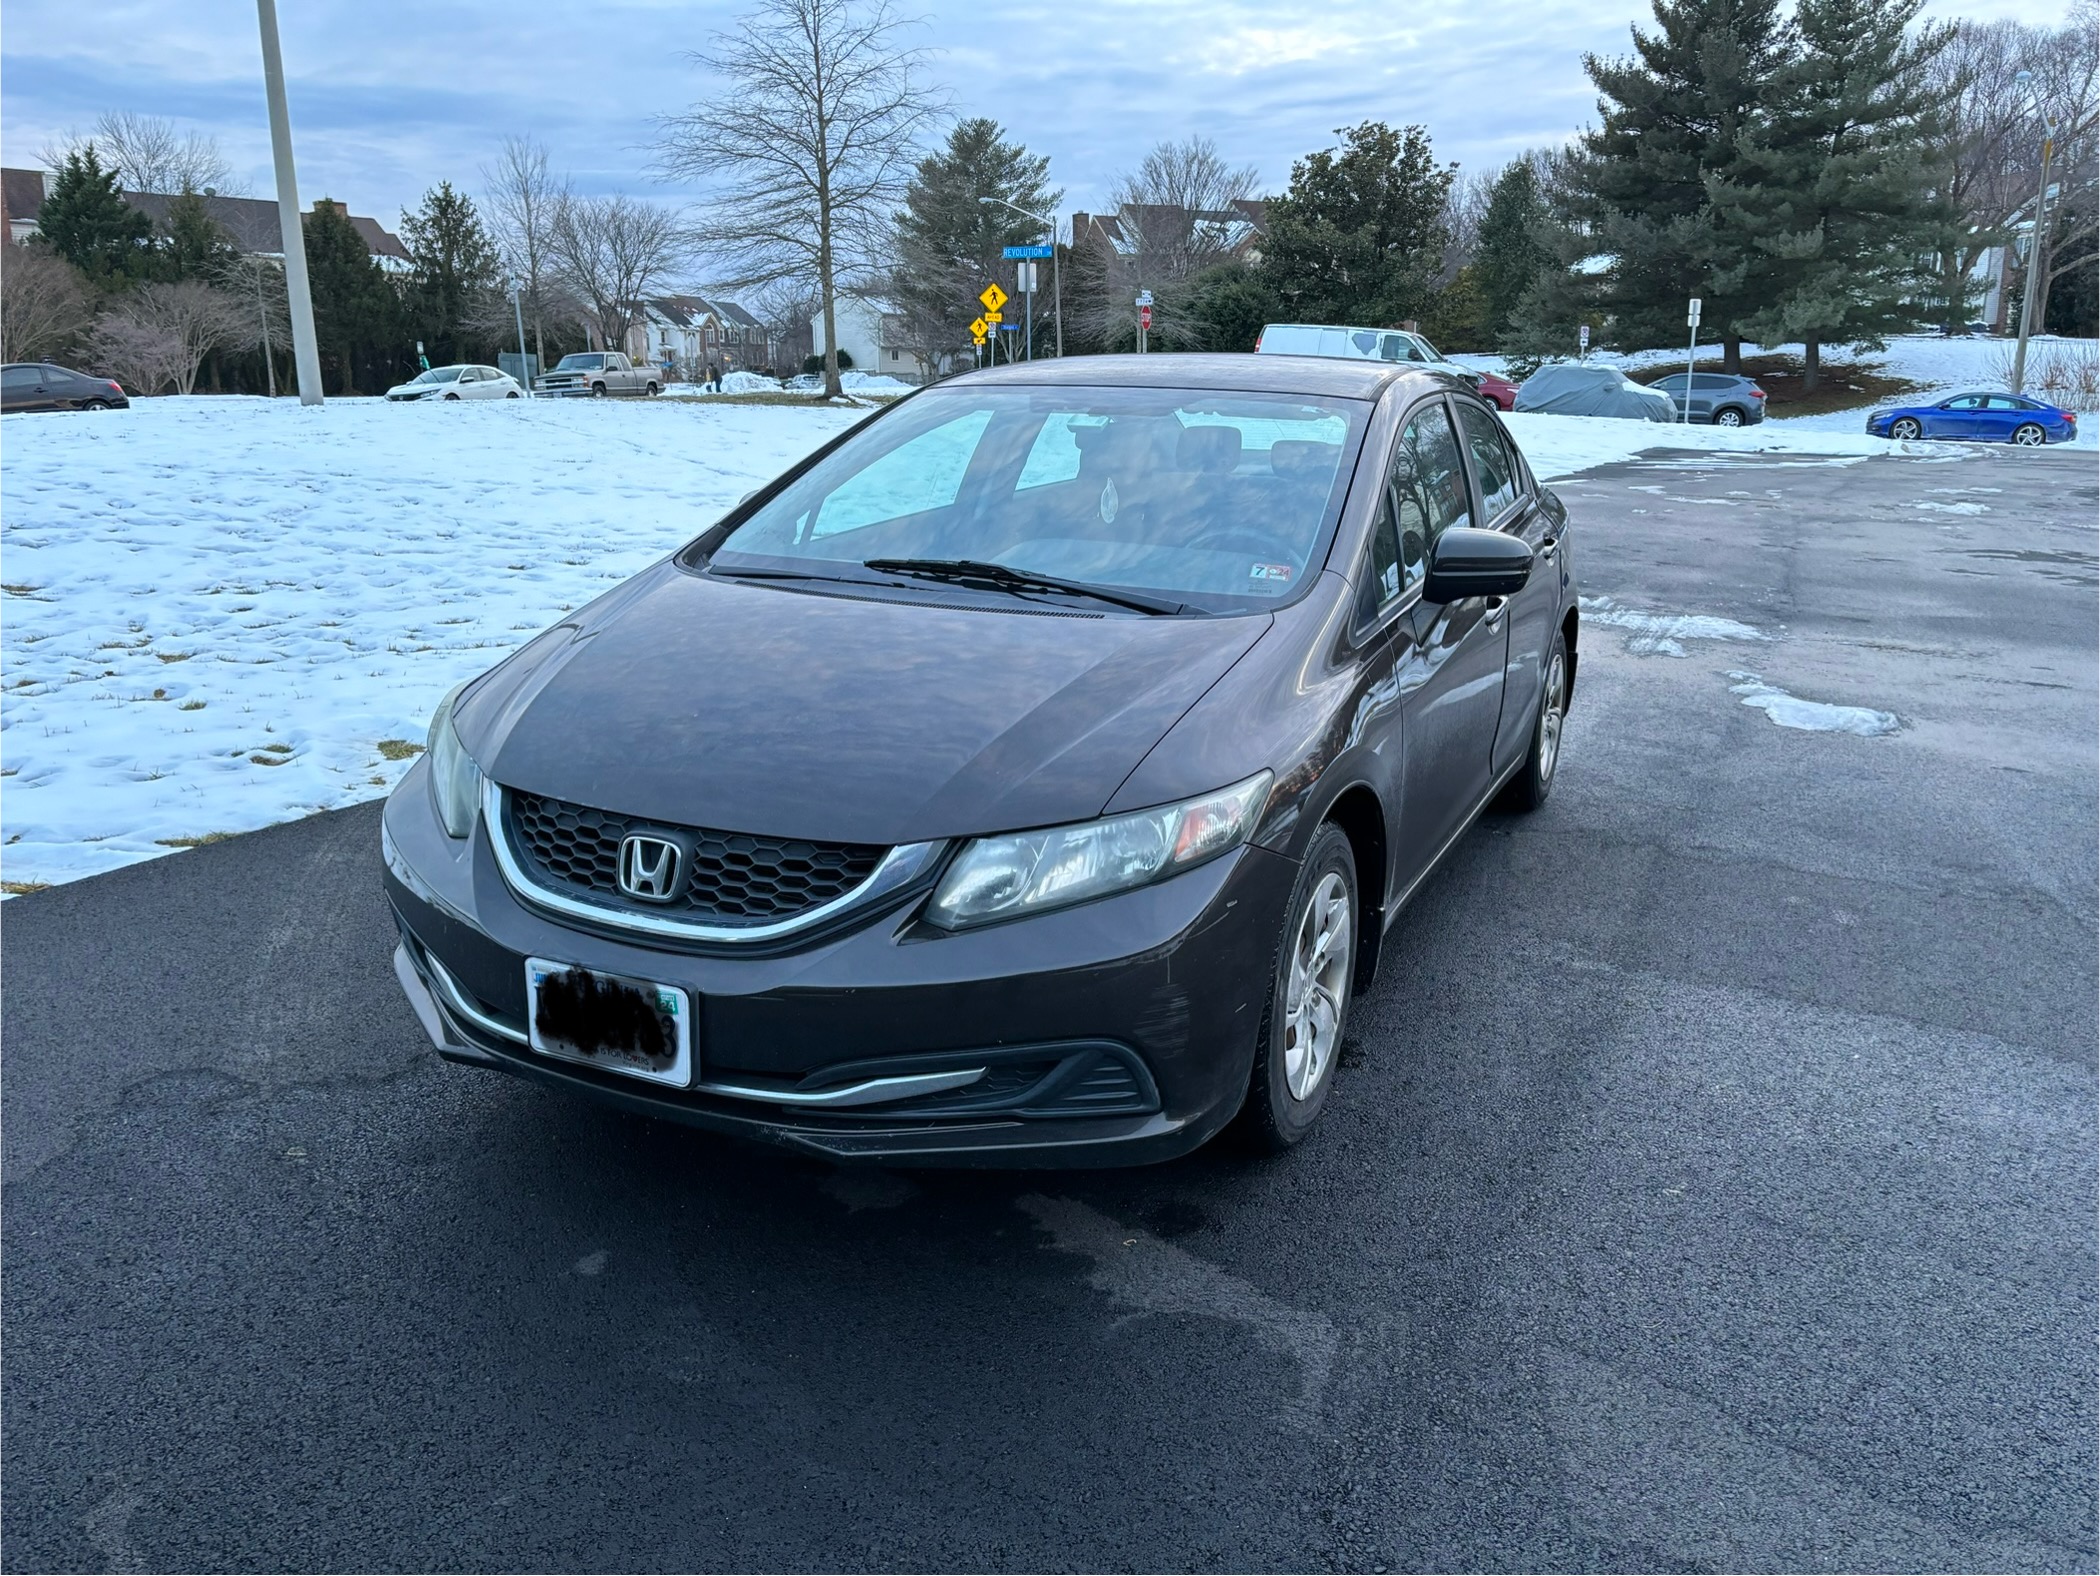 Used Honda Civic for Sale Near Me - Autotrader